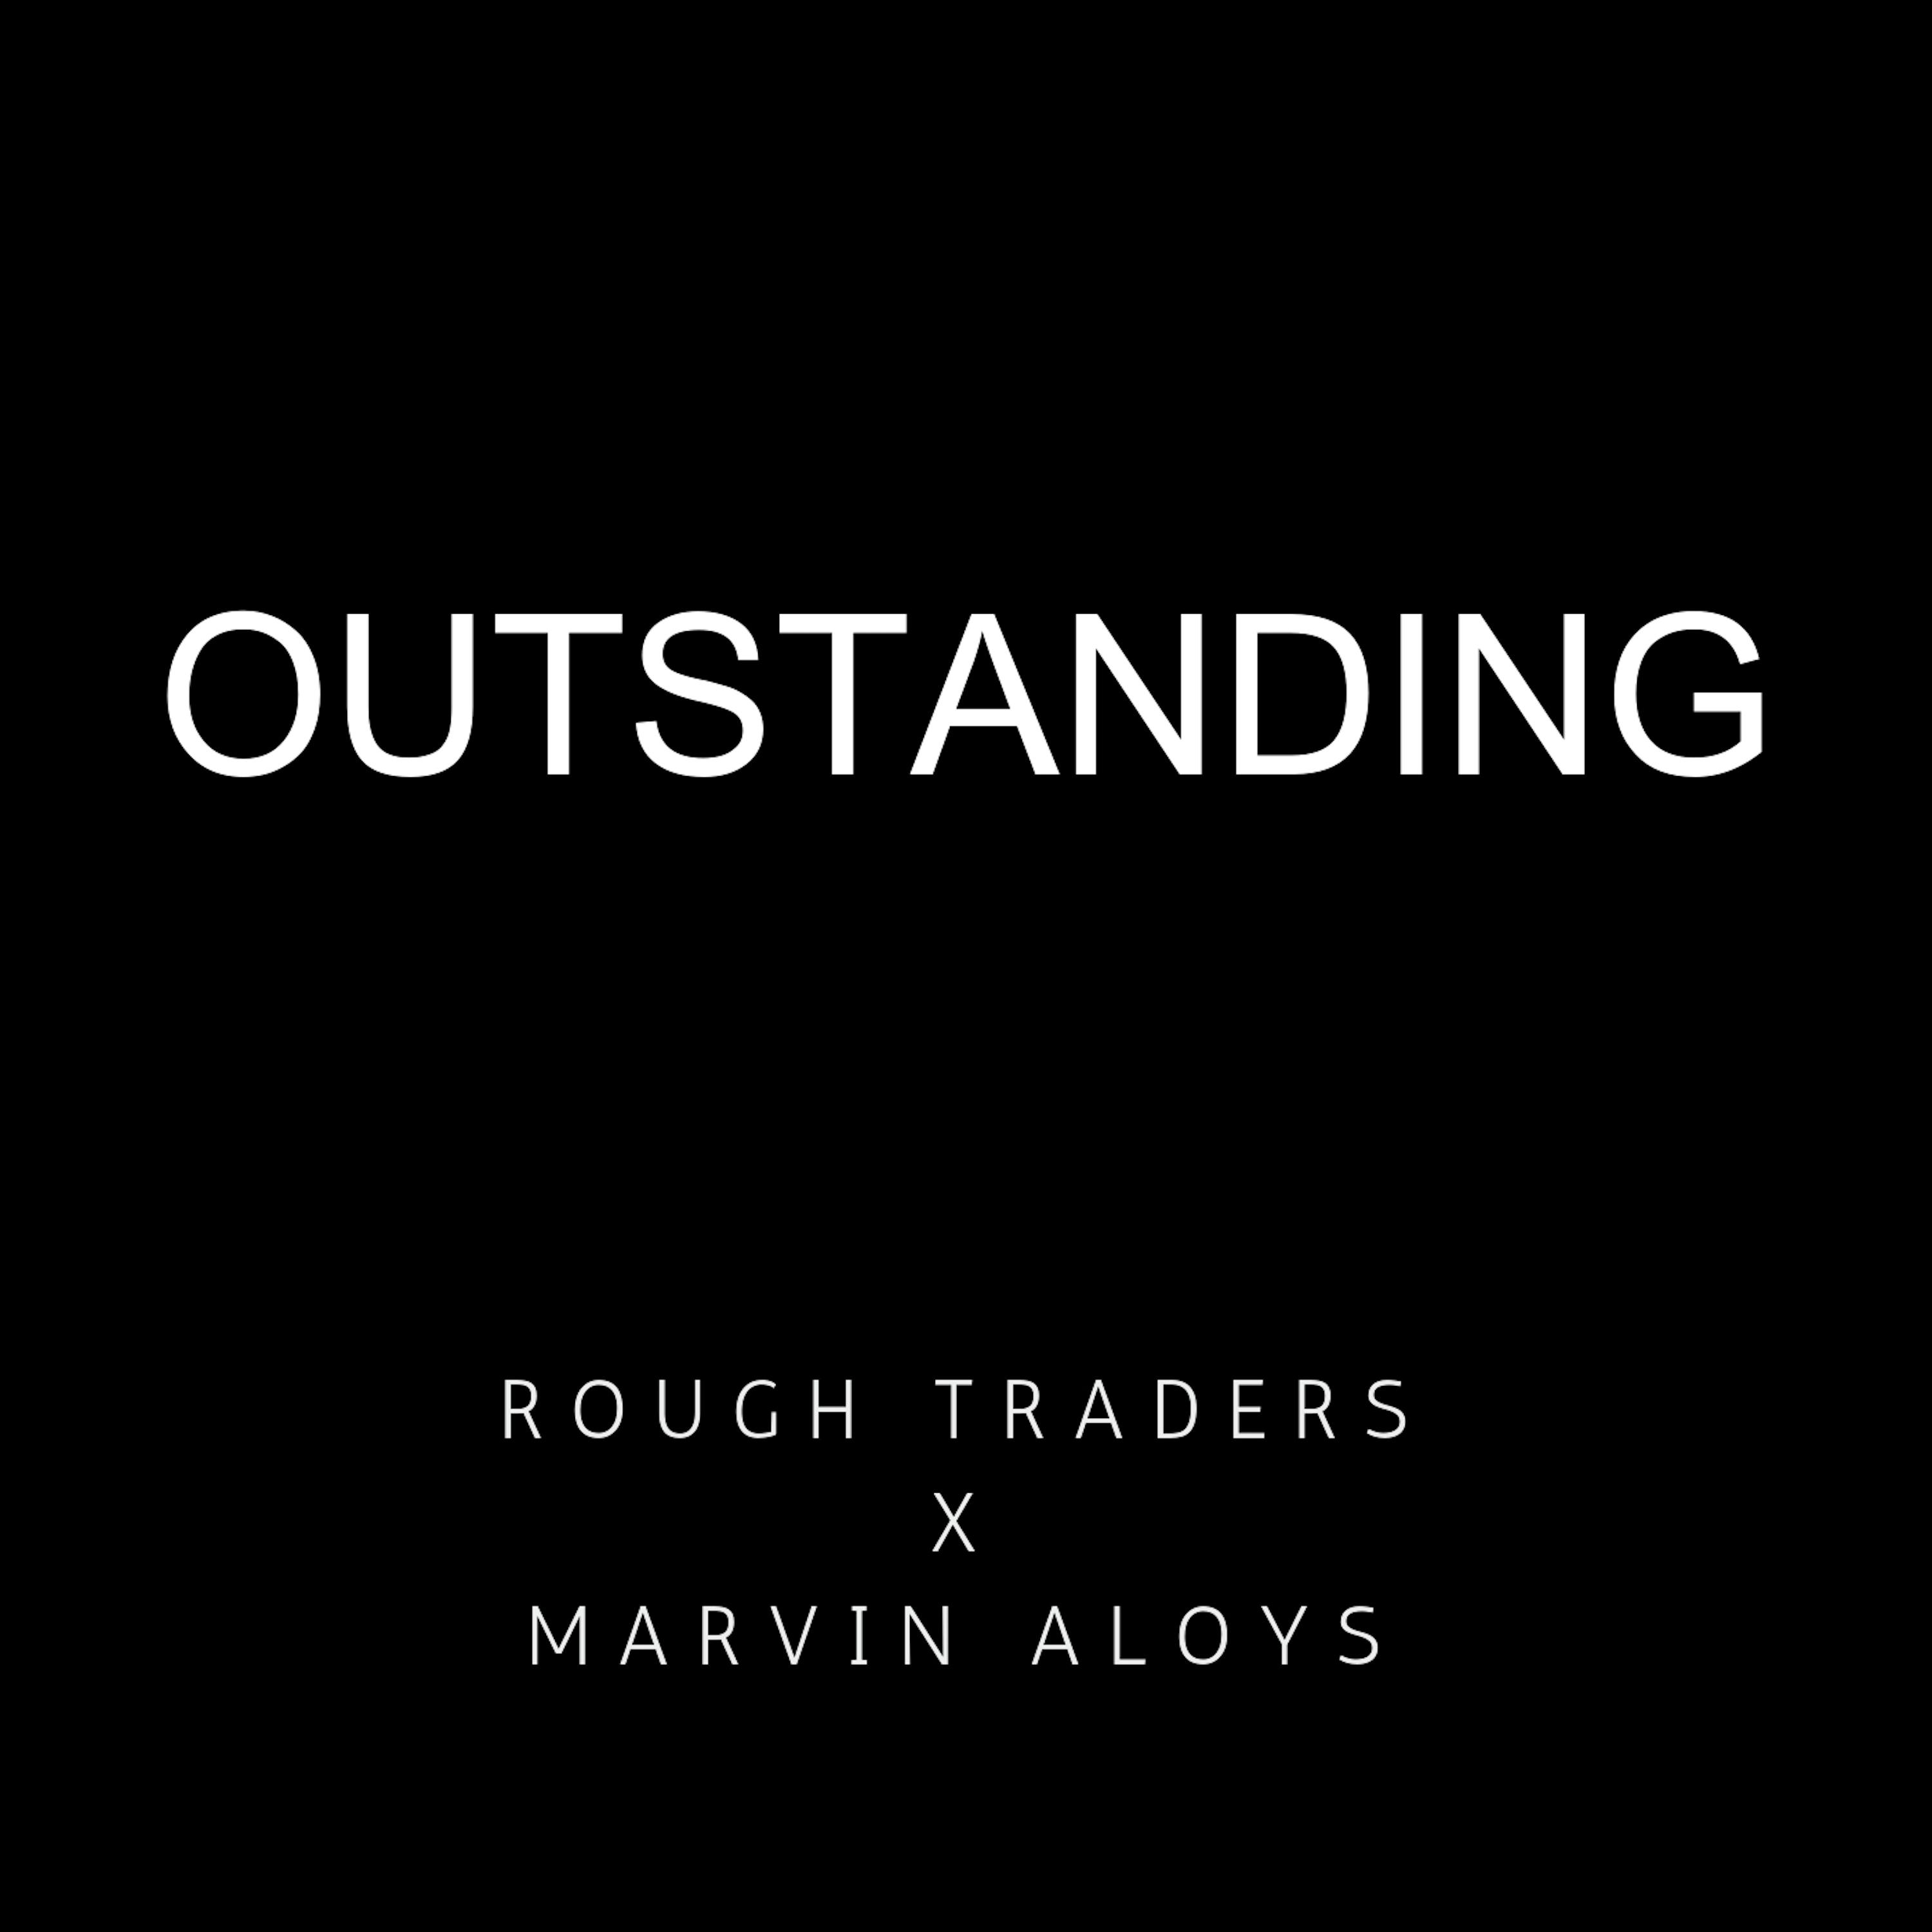 Rough Traders - Outstanding